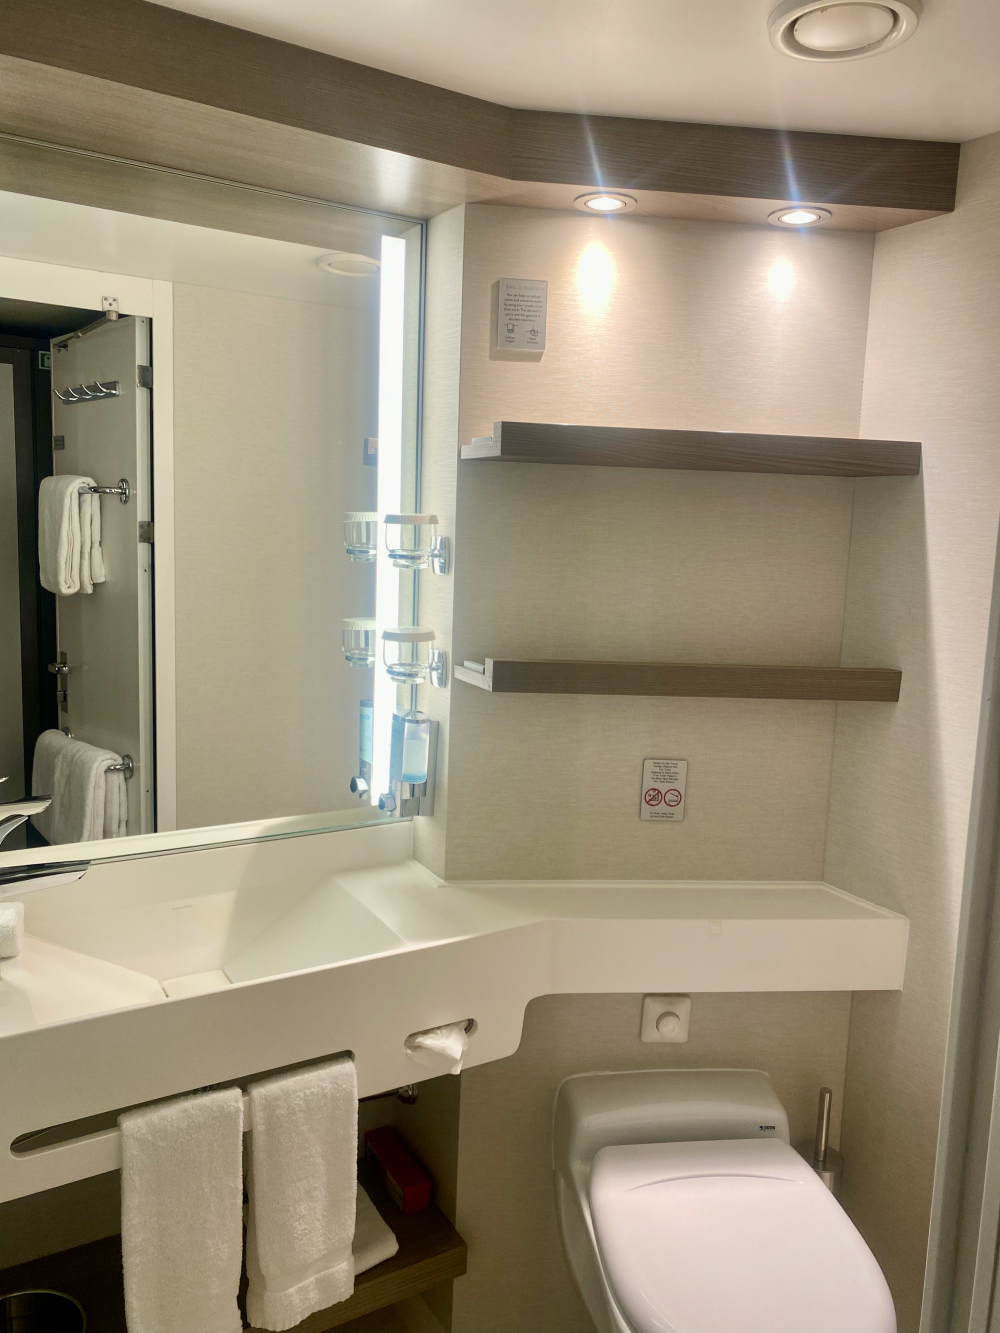 The bathroom in my inside stateroom on board the Norwegian Pearl